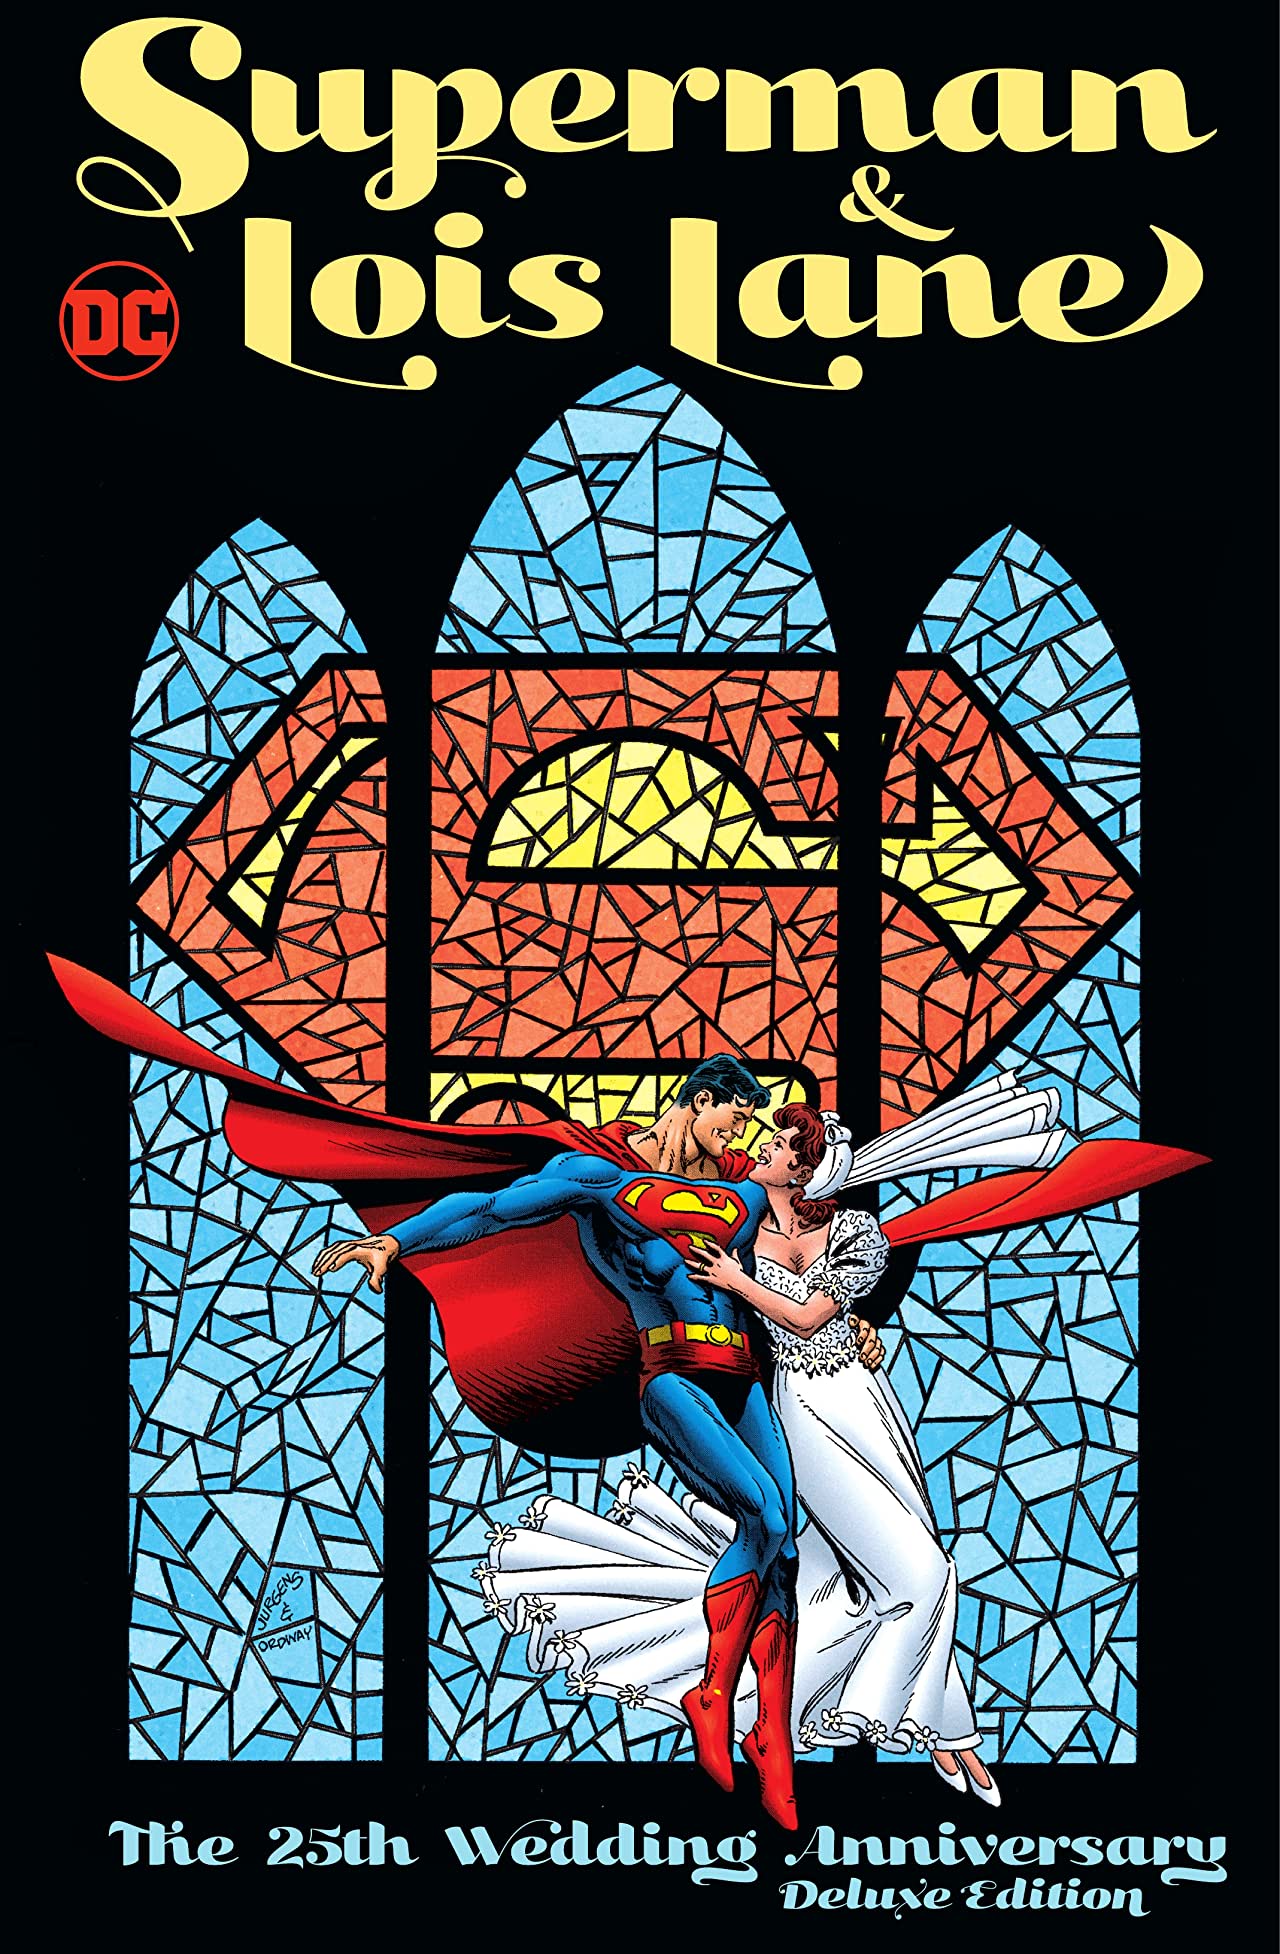 Superman & Lois Lane The 25th Wedding Anniversary Deluxe Edition Hardcover